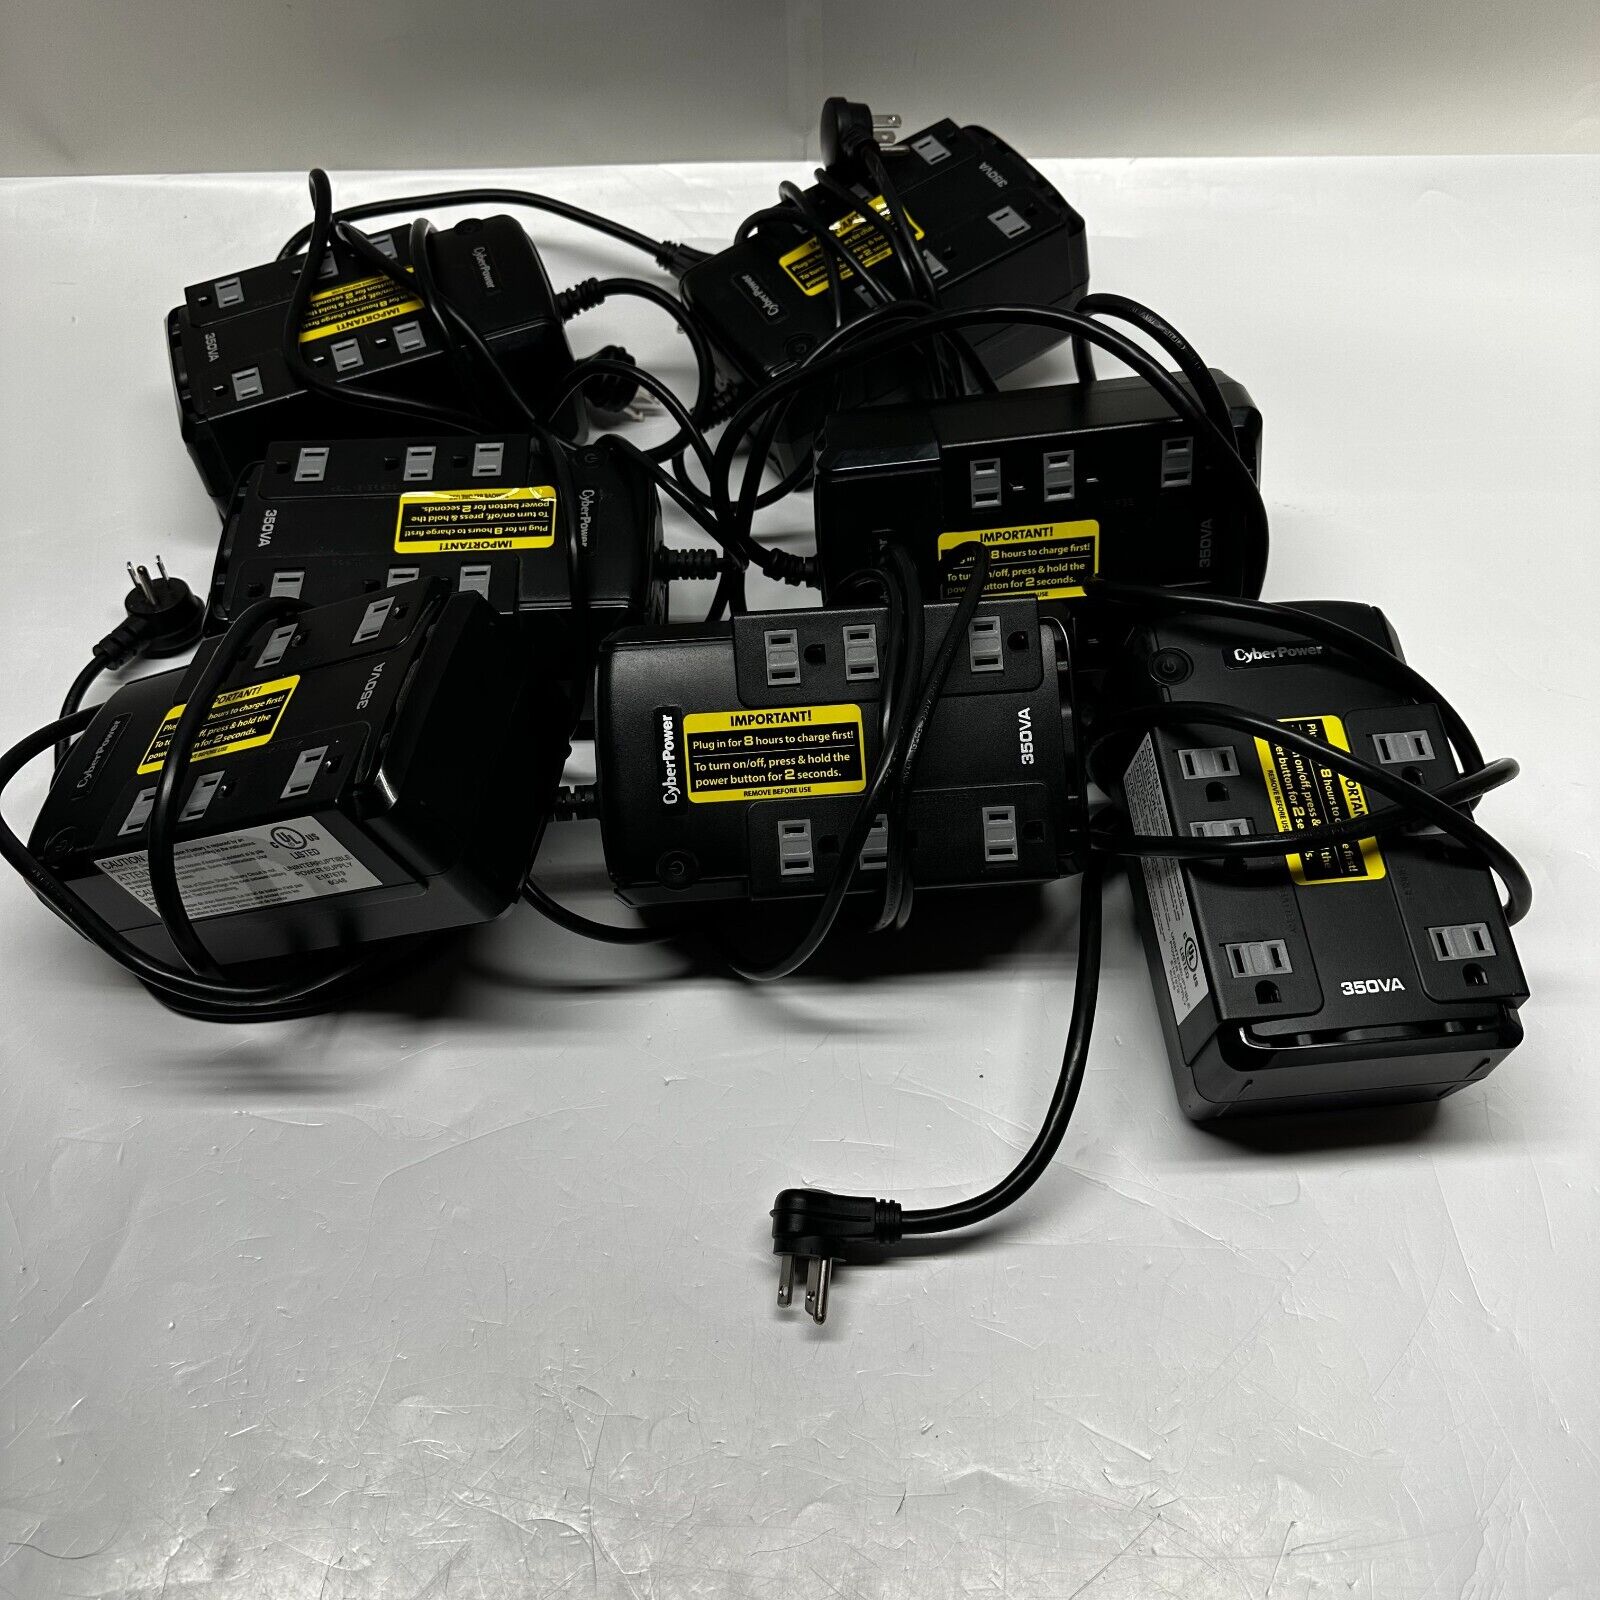 LOT OF 7 - CyberPower CP350SLG, 350VA/255W, 6 Outlets, Compact Black -No Battery